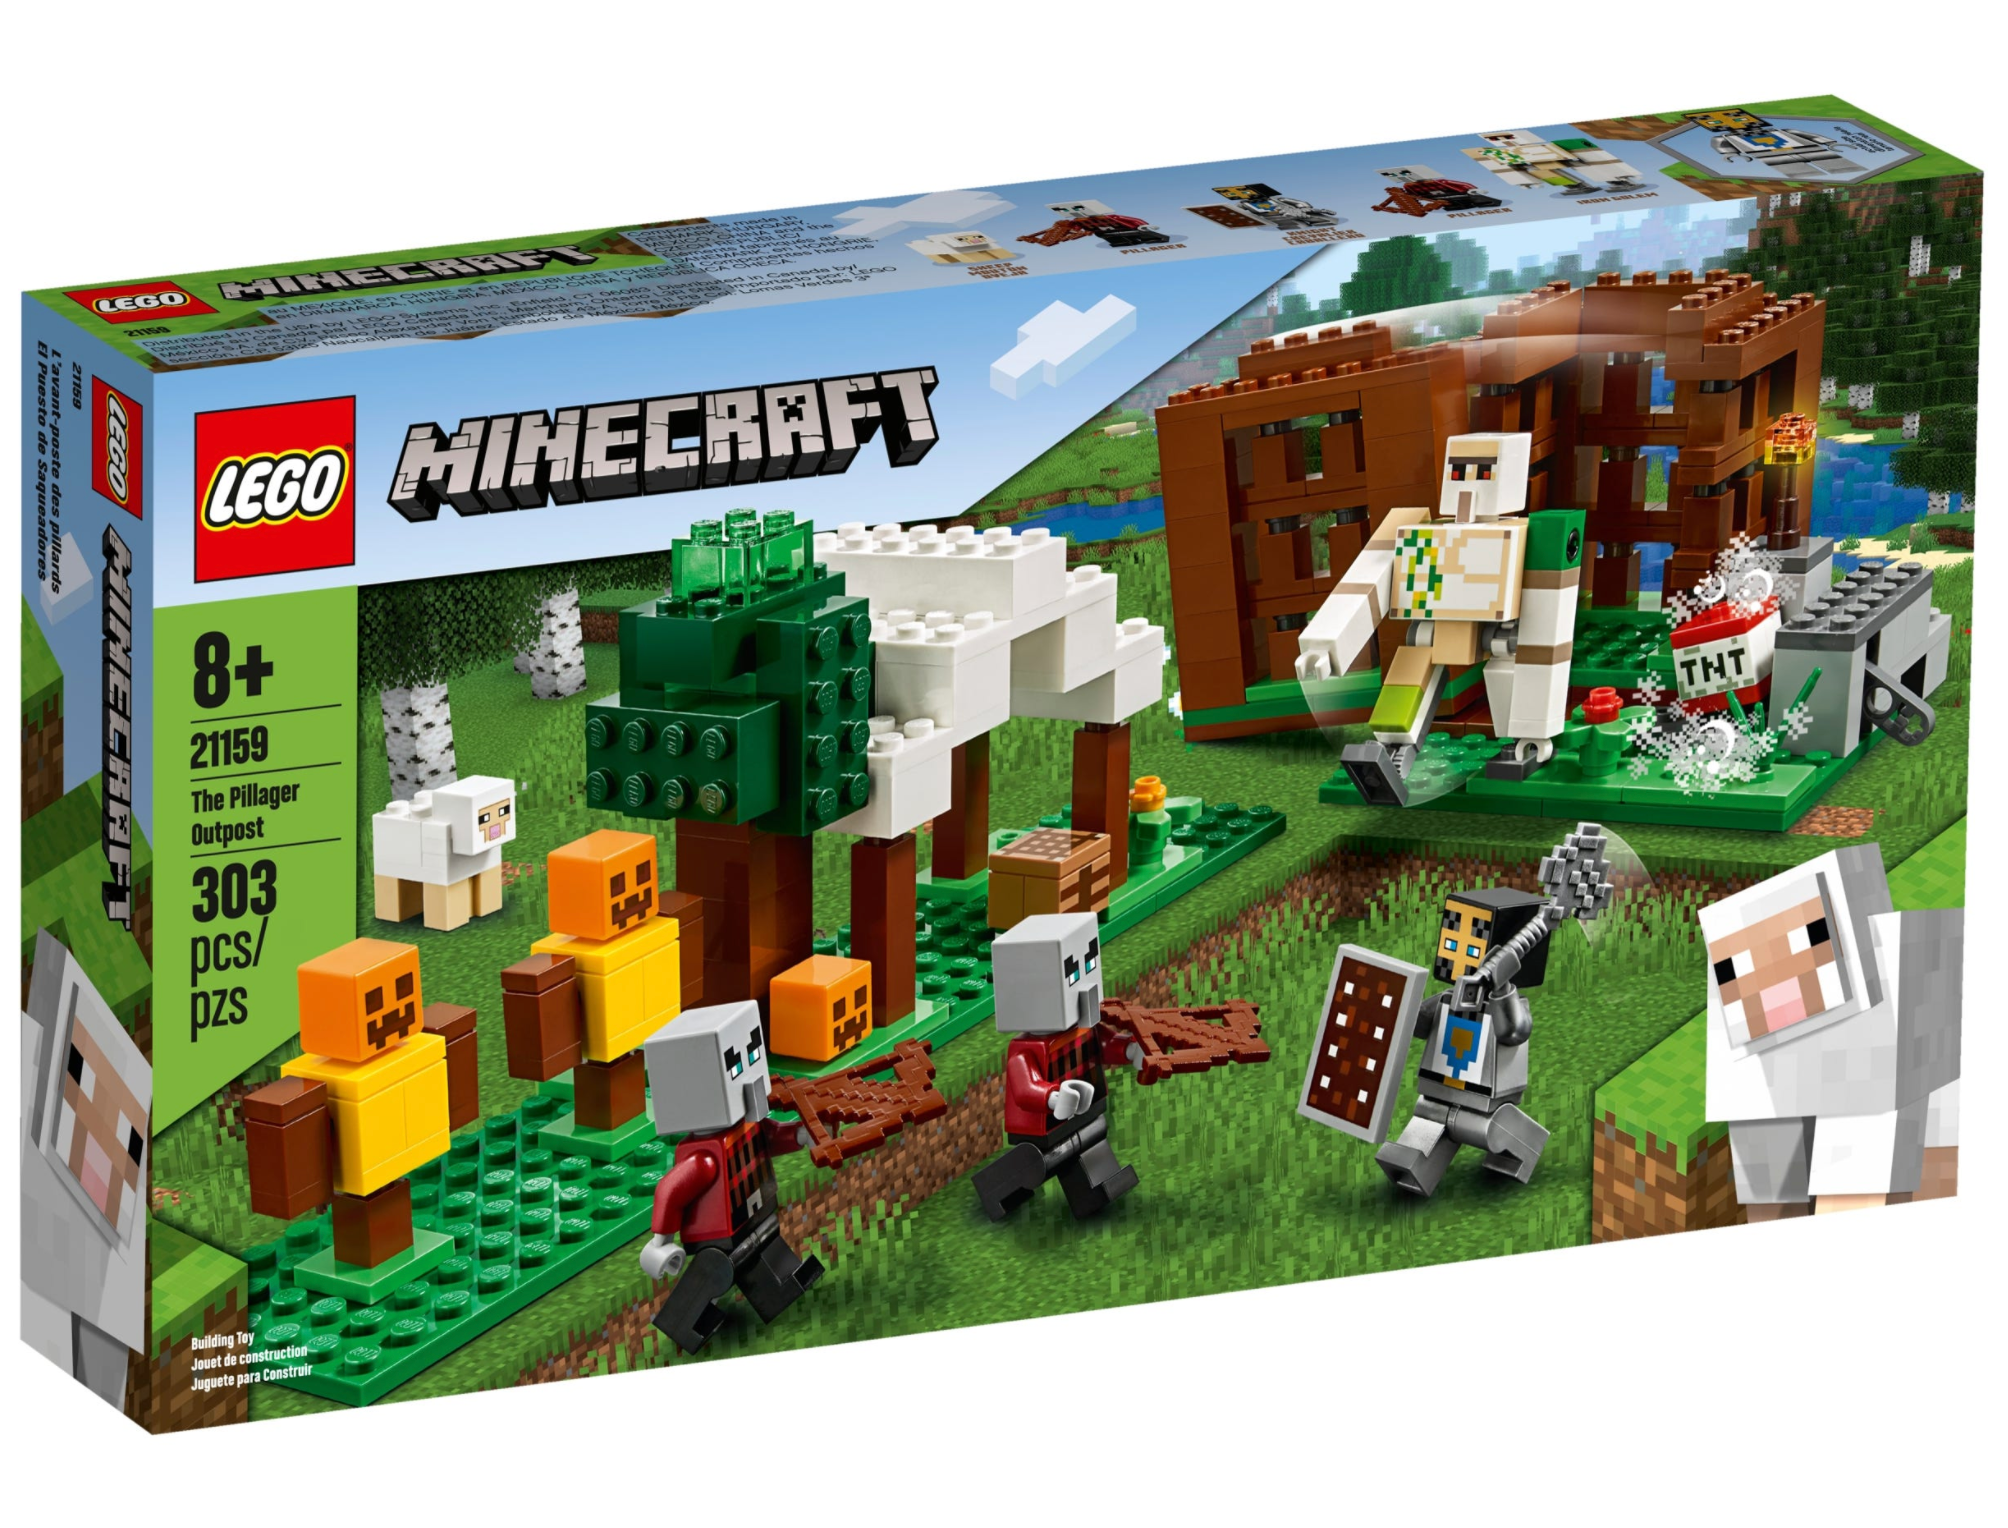 LEGO: Minecraft - The Pillager Outpost